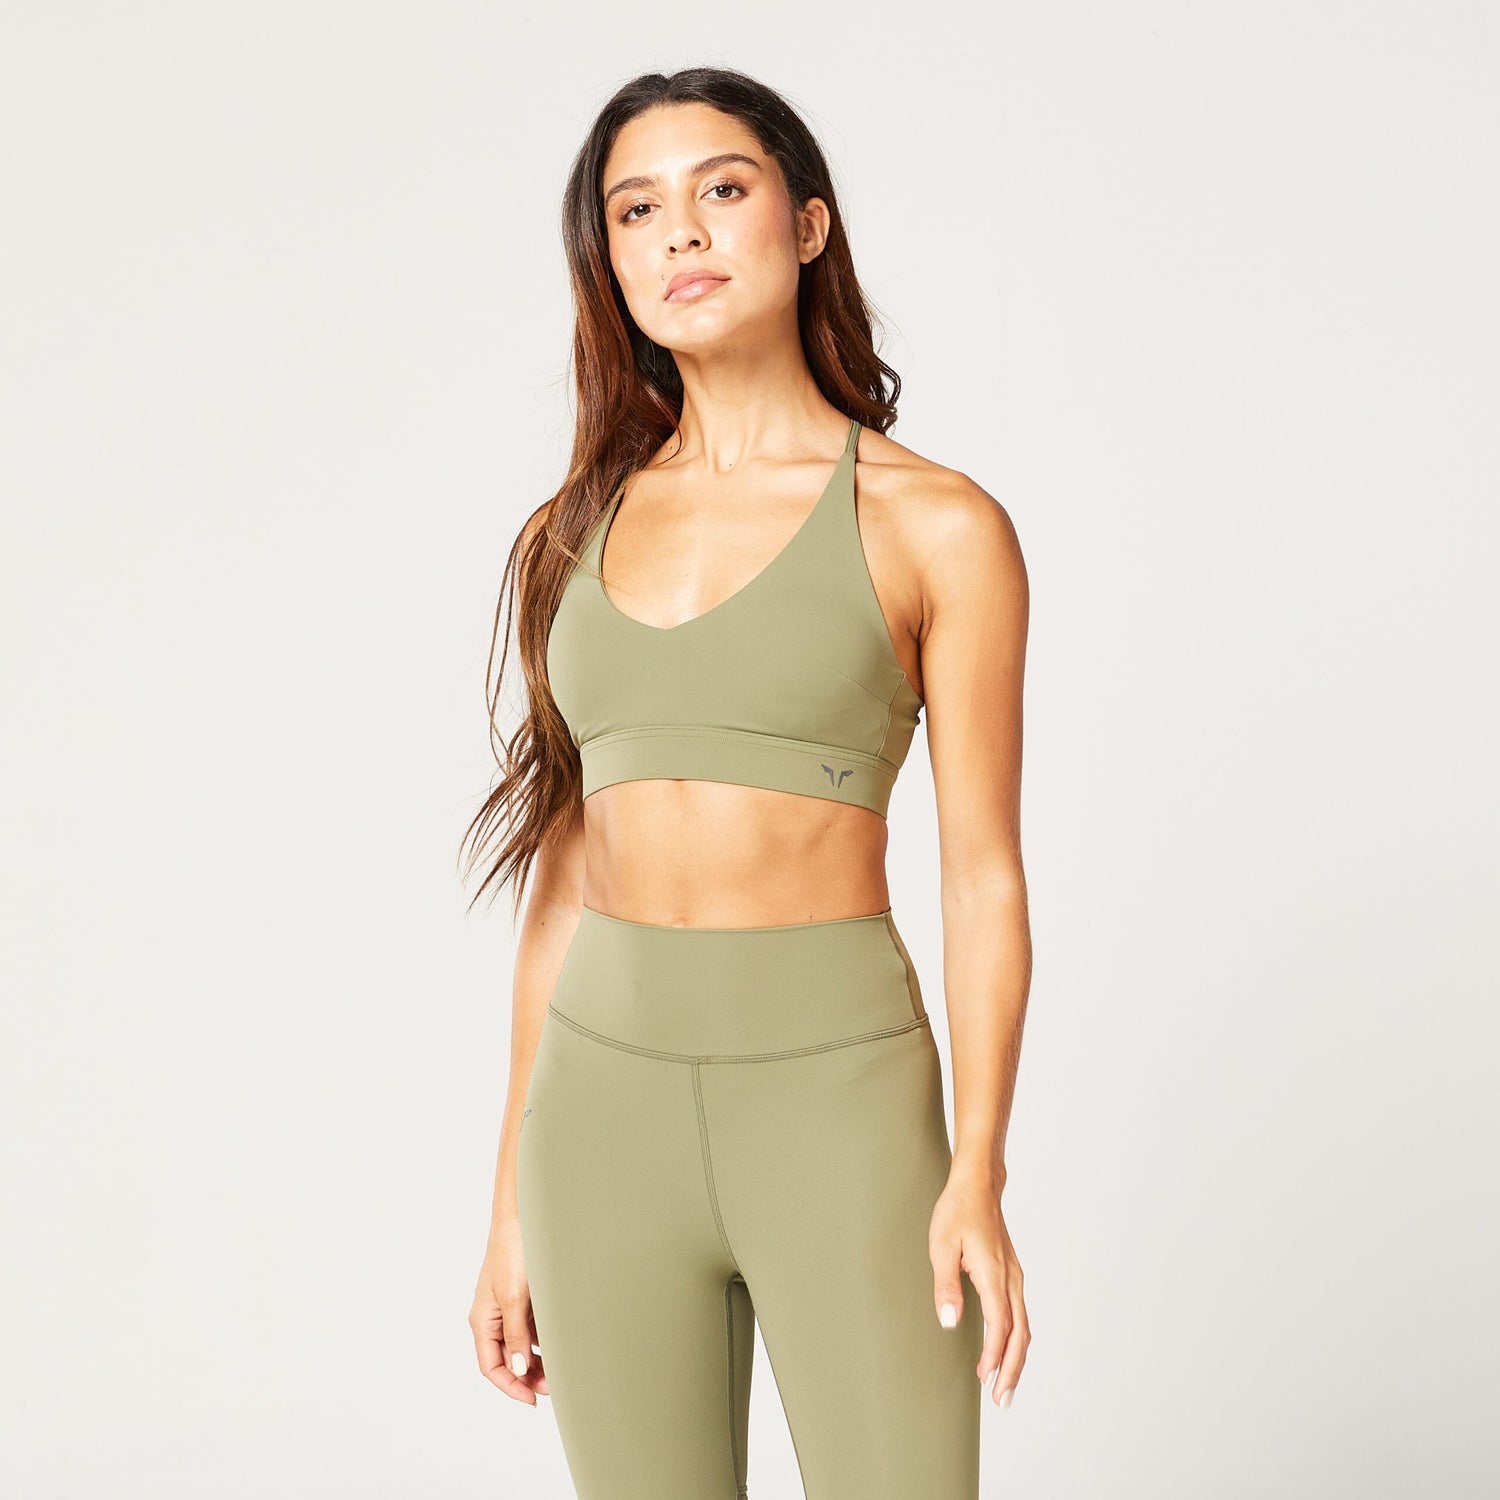 squatwolf-workout-clothes-code-live-in-bra-green-sports-bra-for-gym